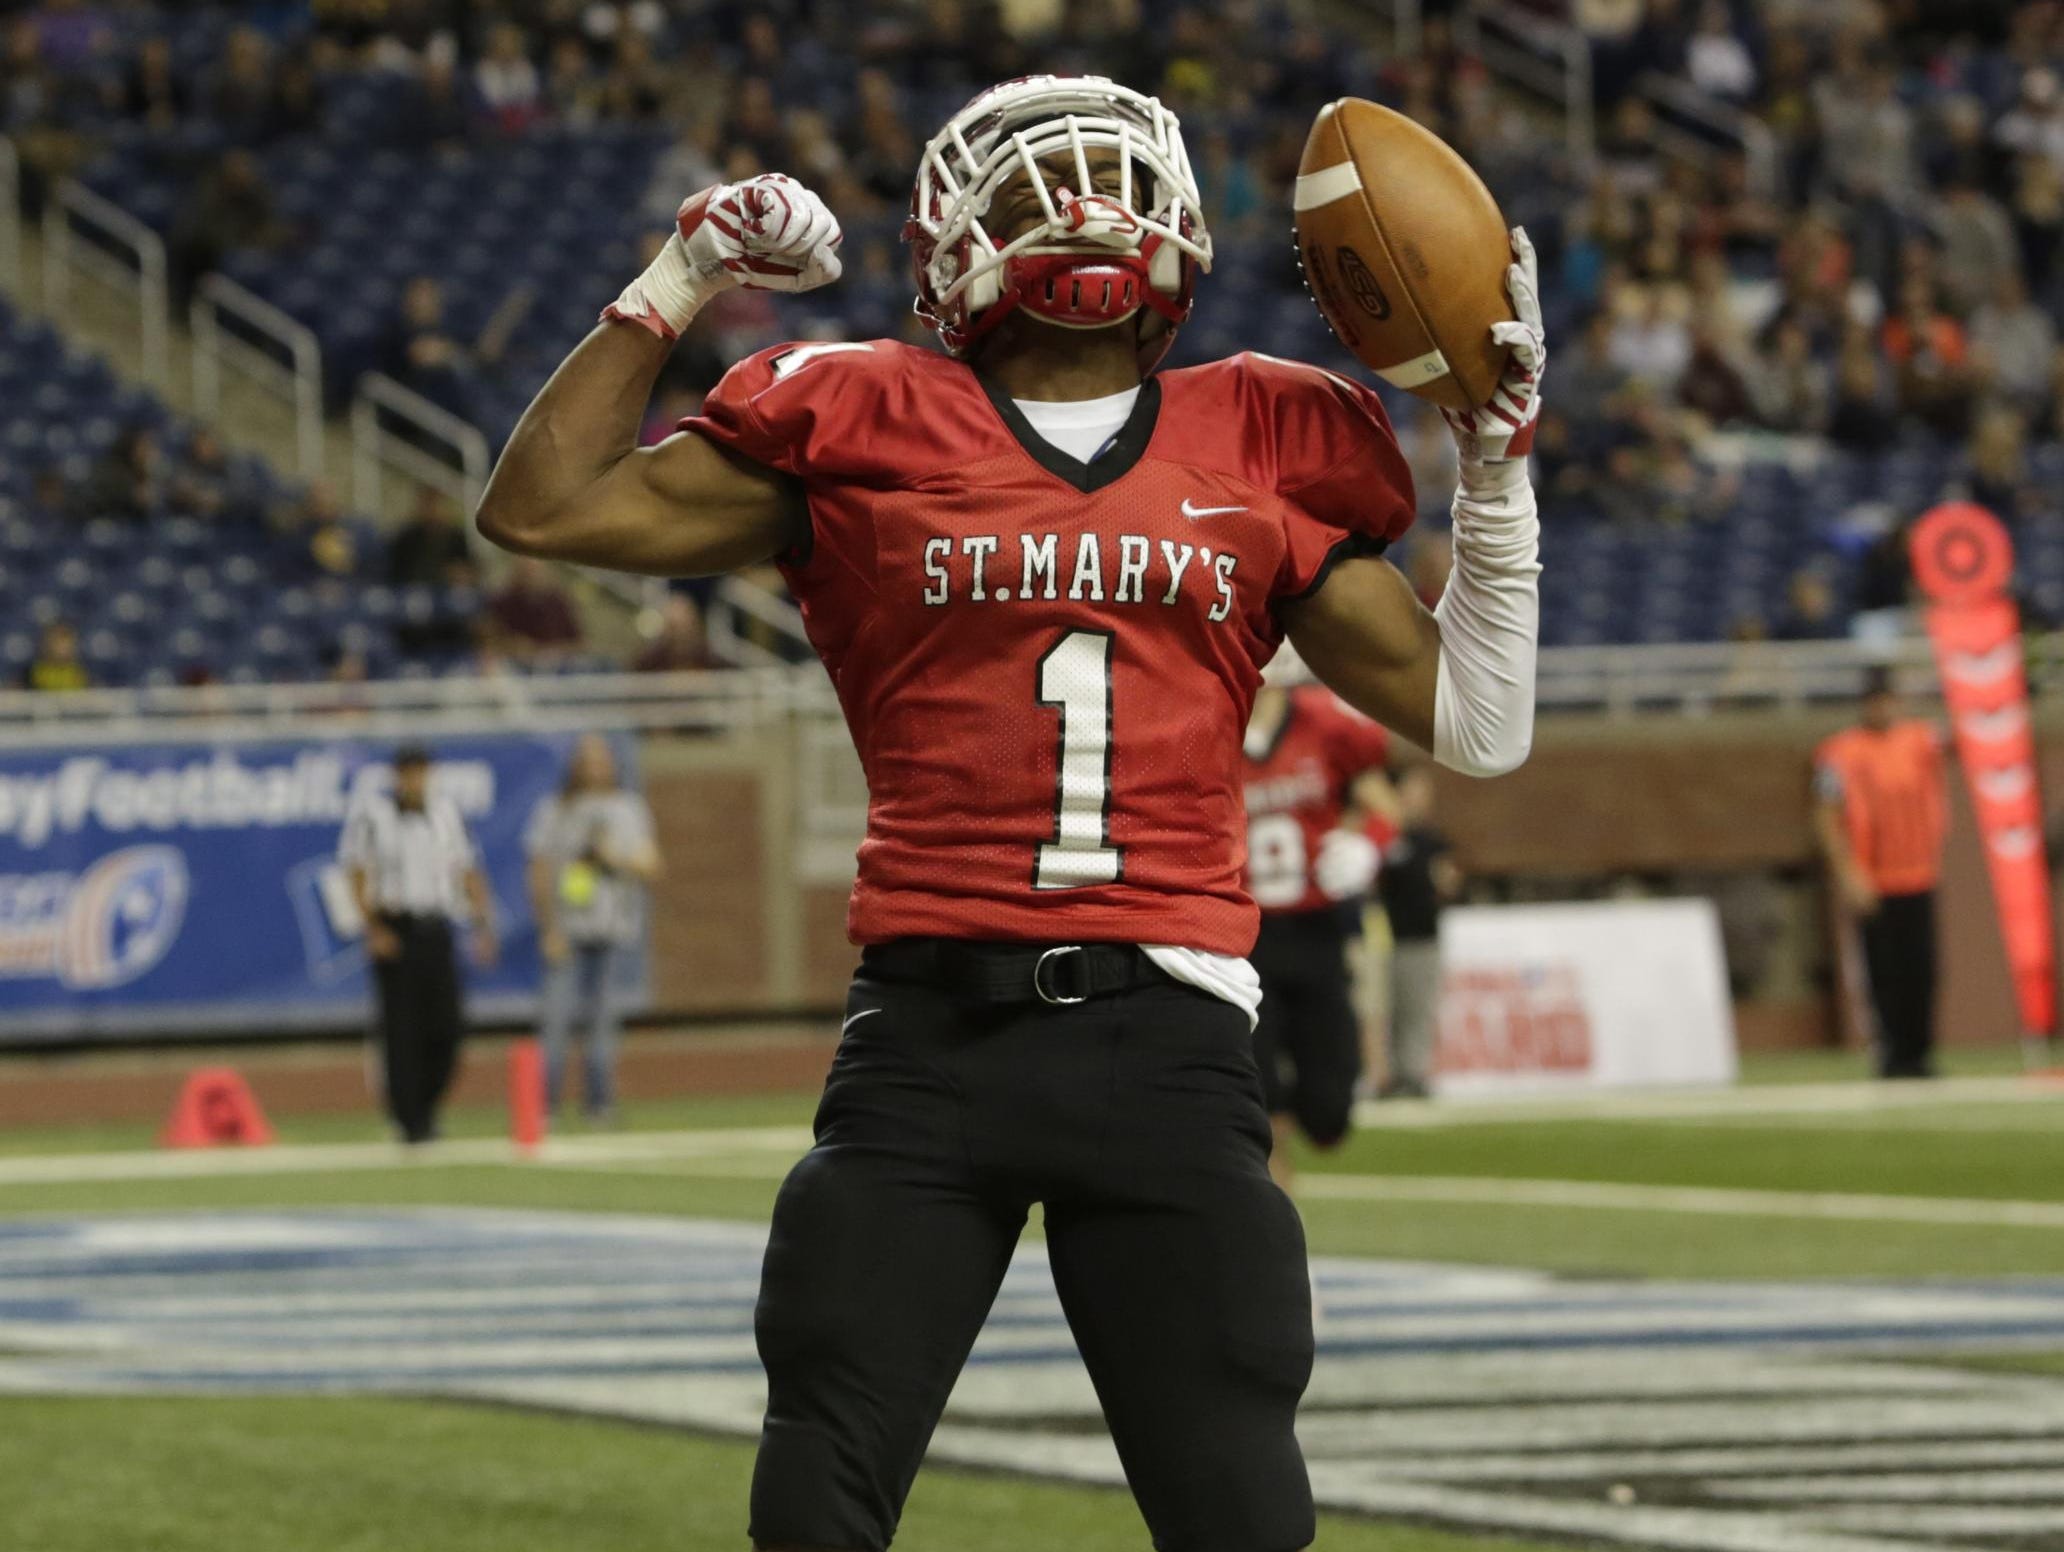 Orchard Lake St. Mary’s receiver K. J. Hamler decided earlier this week to move to IMG Academy in Florida for his senior season.